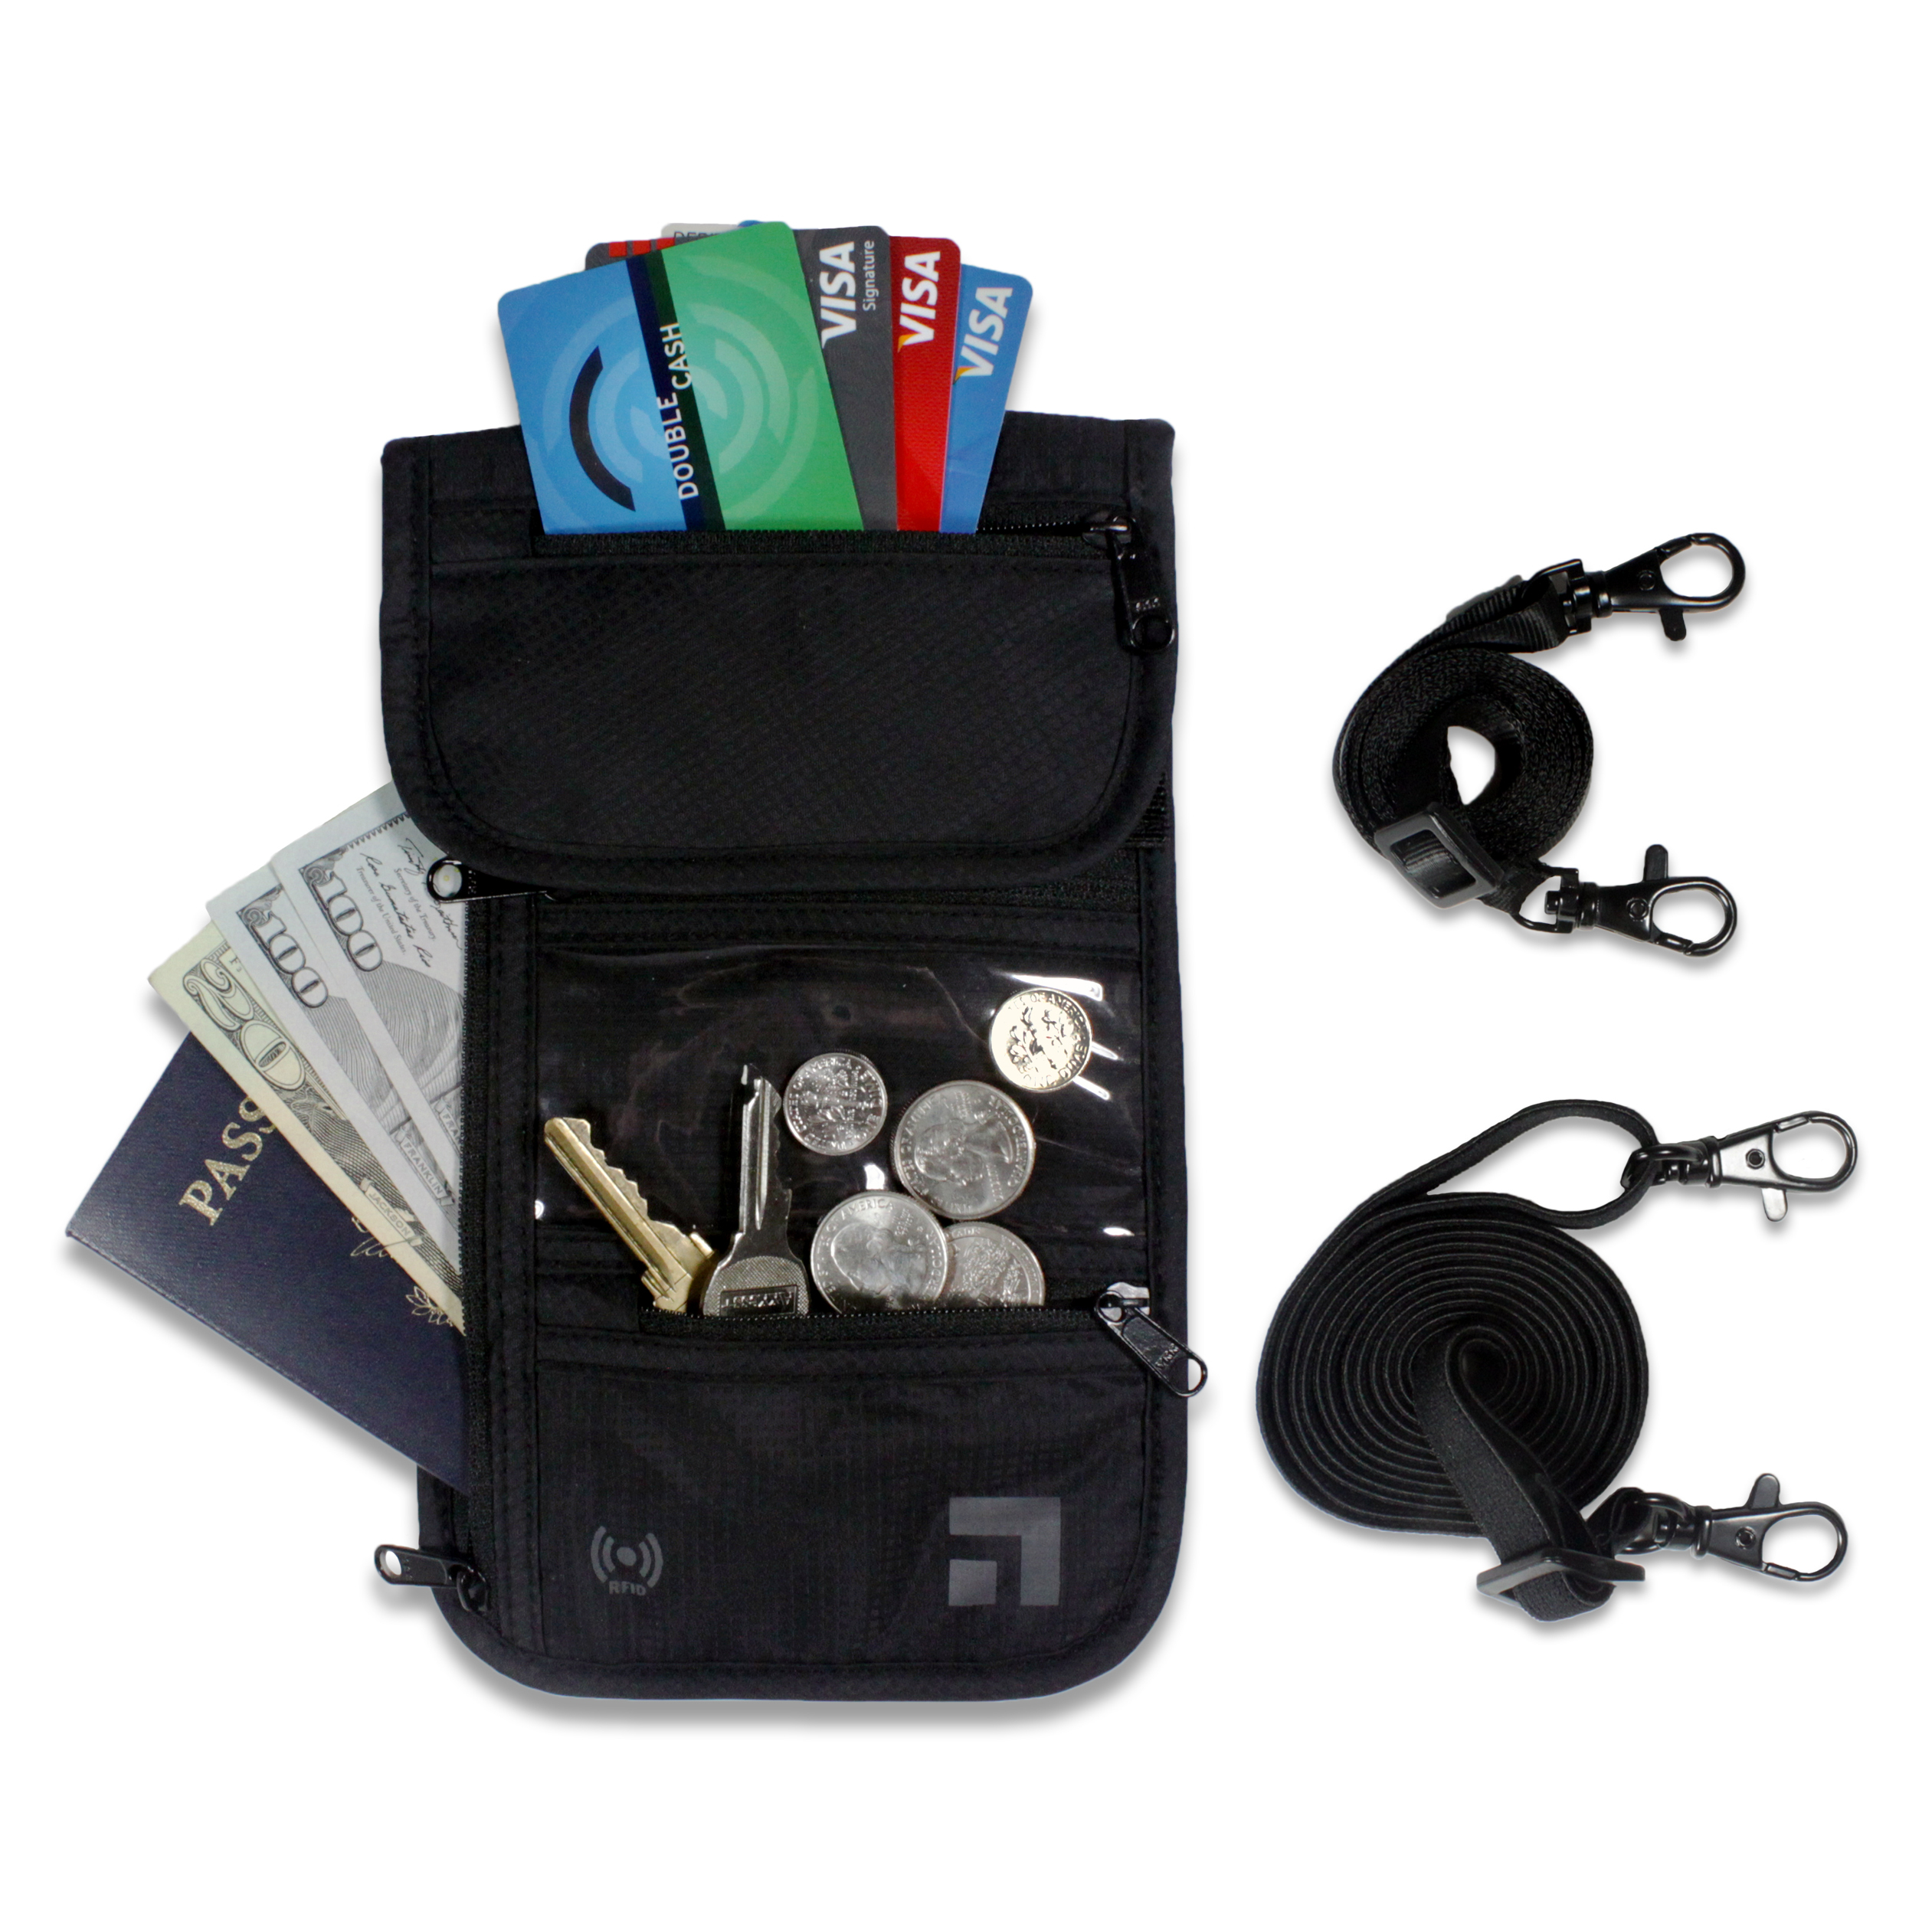 Slate Travel Neck Wallet - RFID Blocking Passport Holder - Waterproof Traveling Pouch - Includes 2 Different Sized Straps … - image 1 of 5